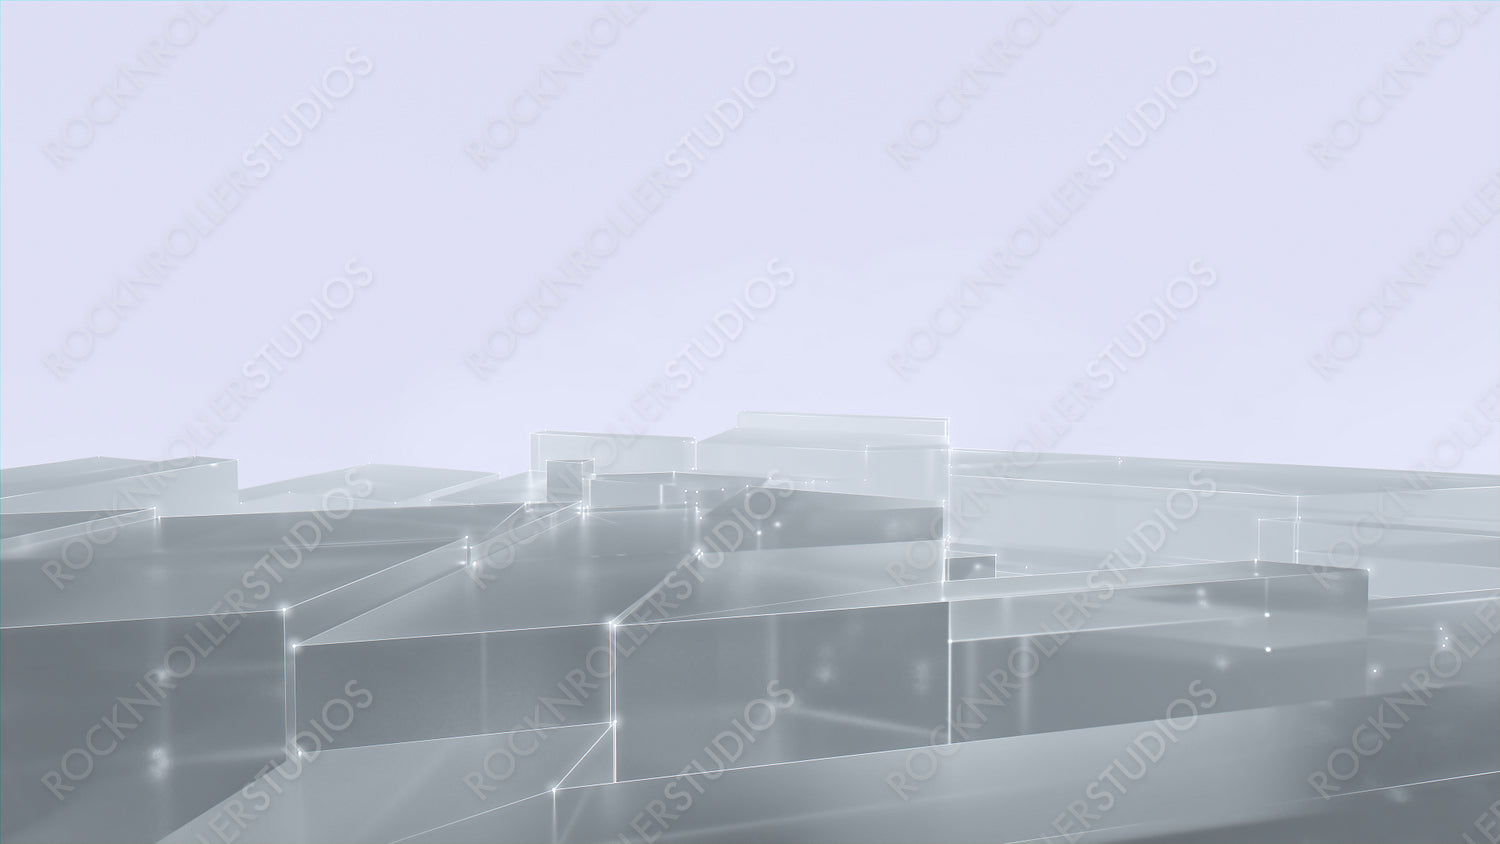 Futuristic, High Tech, Light Background, with Network Lines and Copy Space. Digital Connectivity Concept. 3D Render